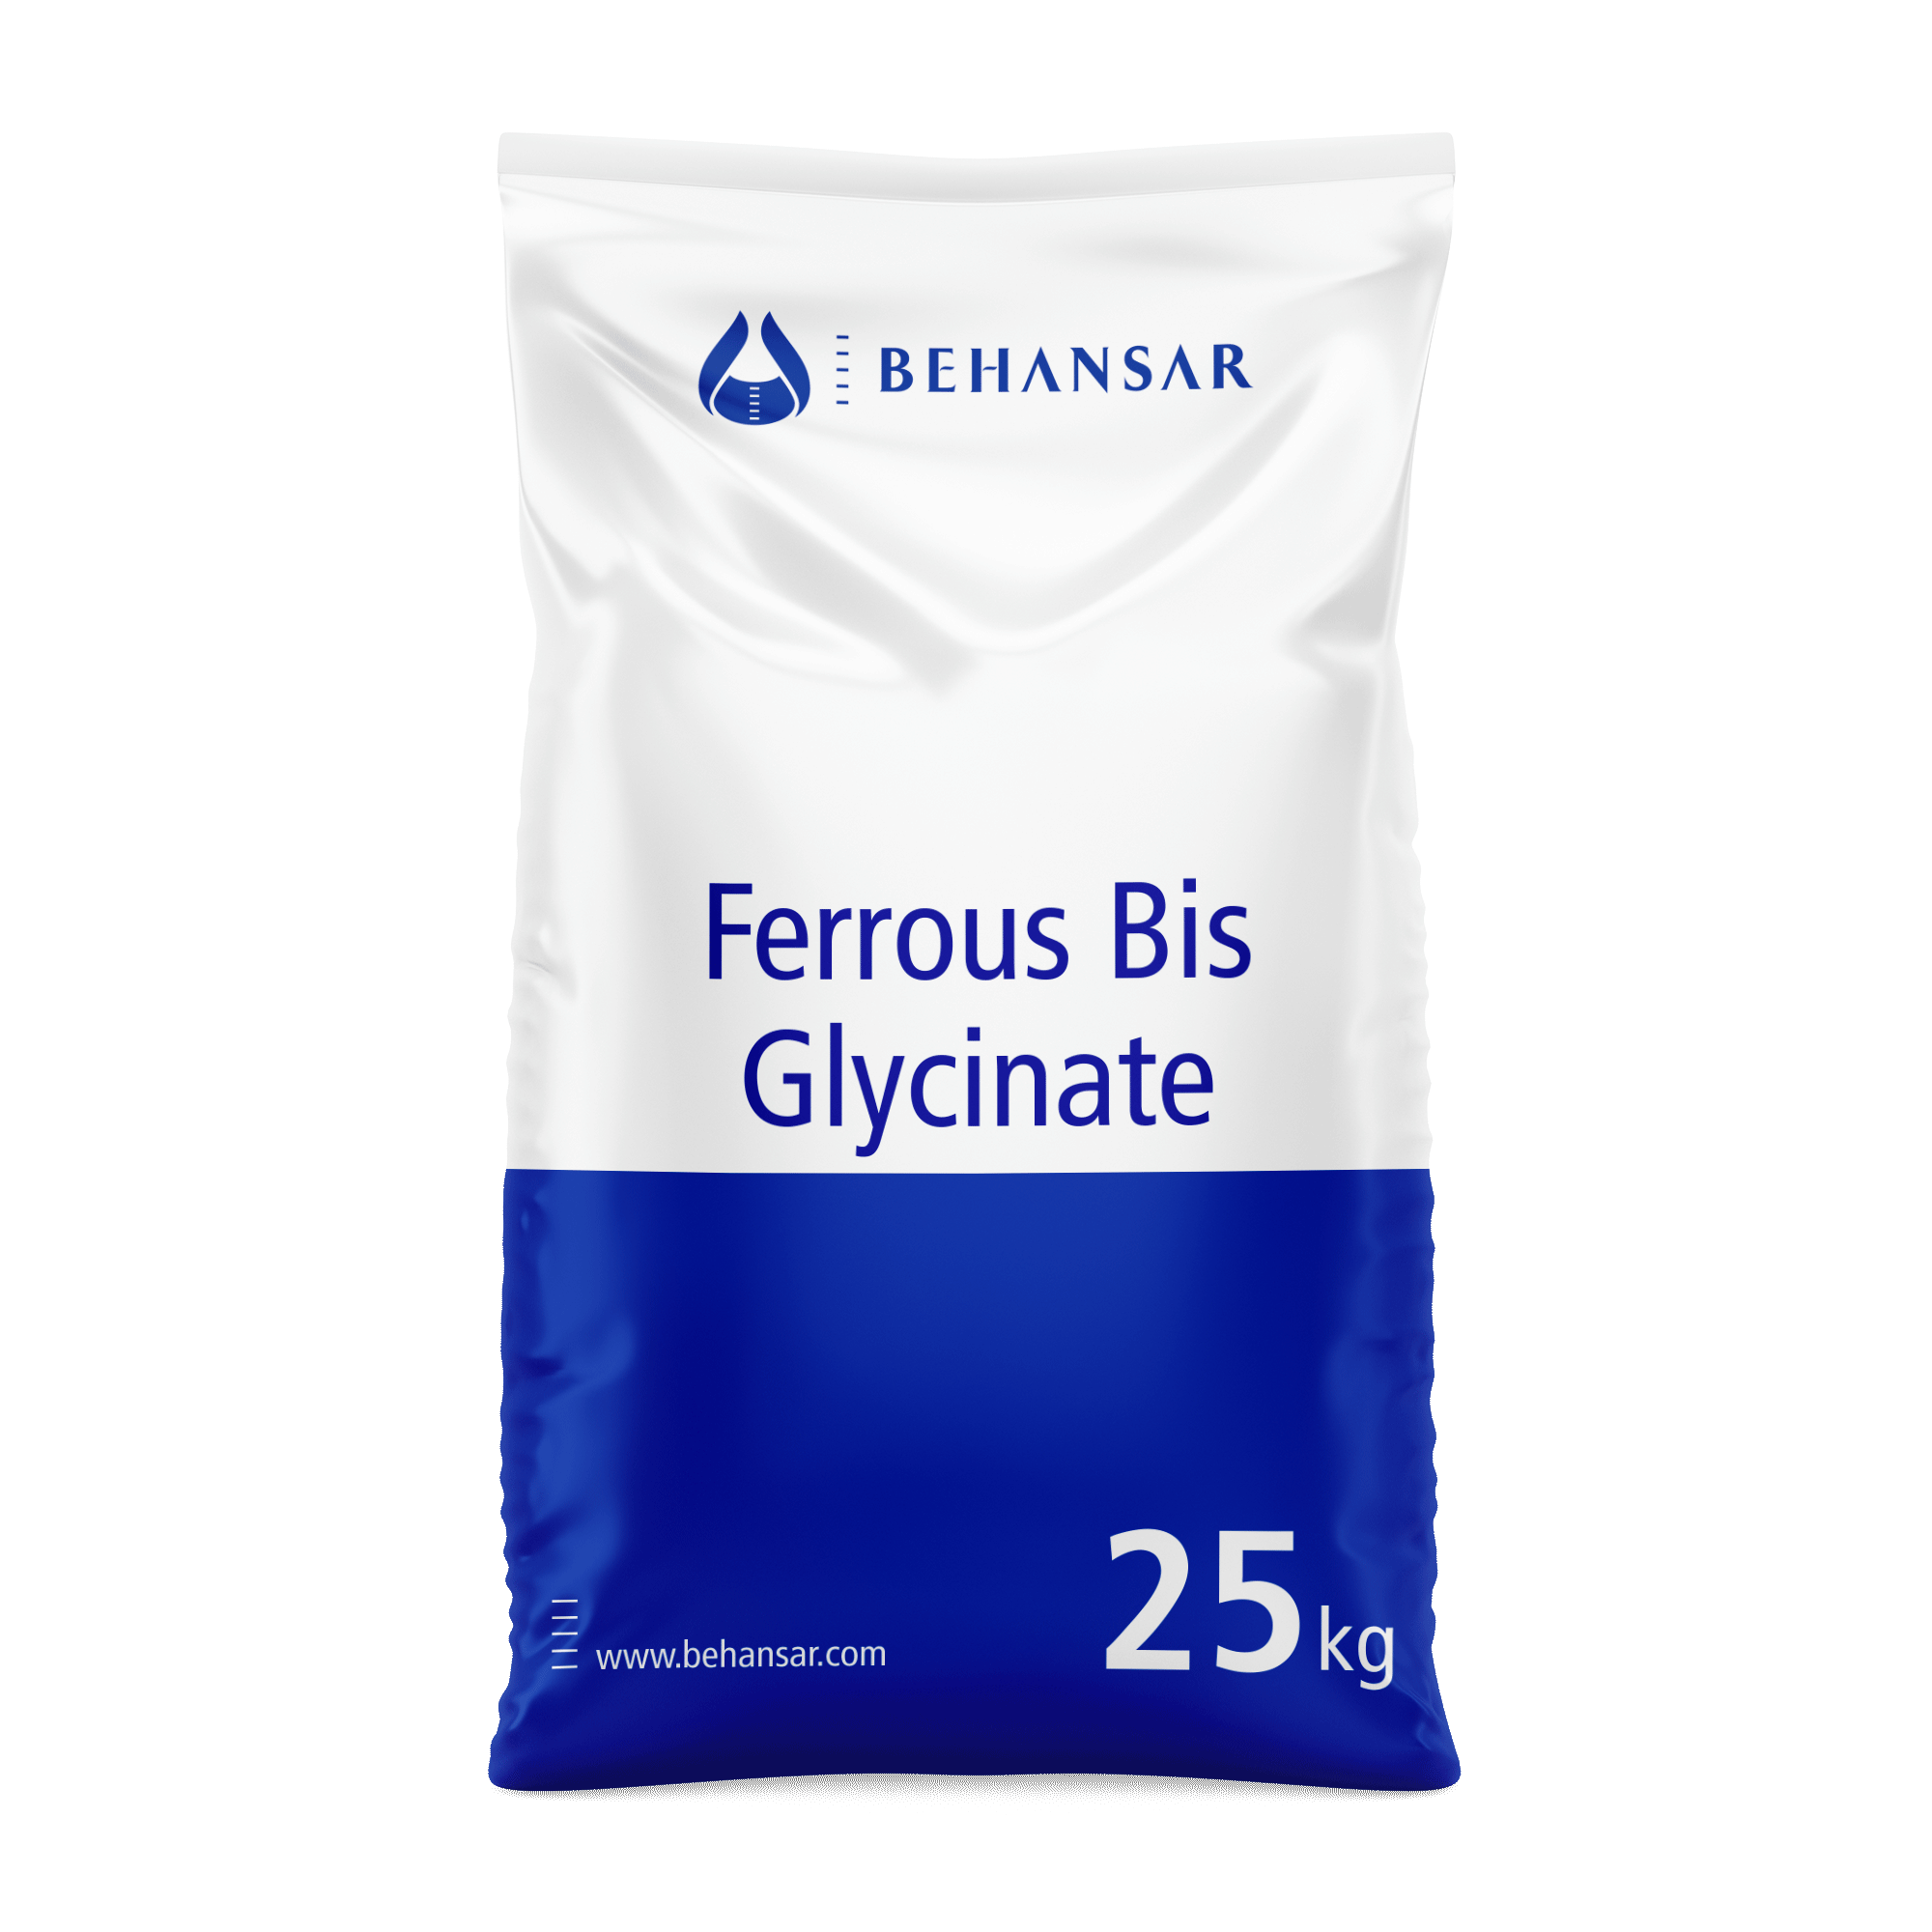 Ferrous Bis Glycinate is one of the products of Behansar Co